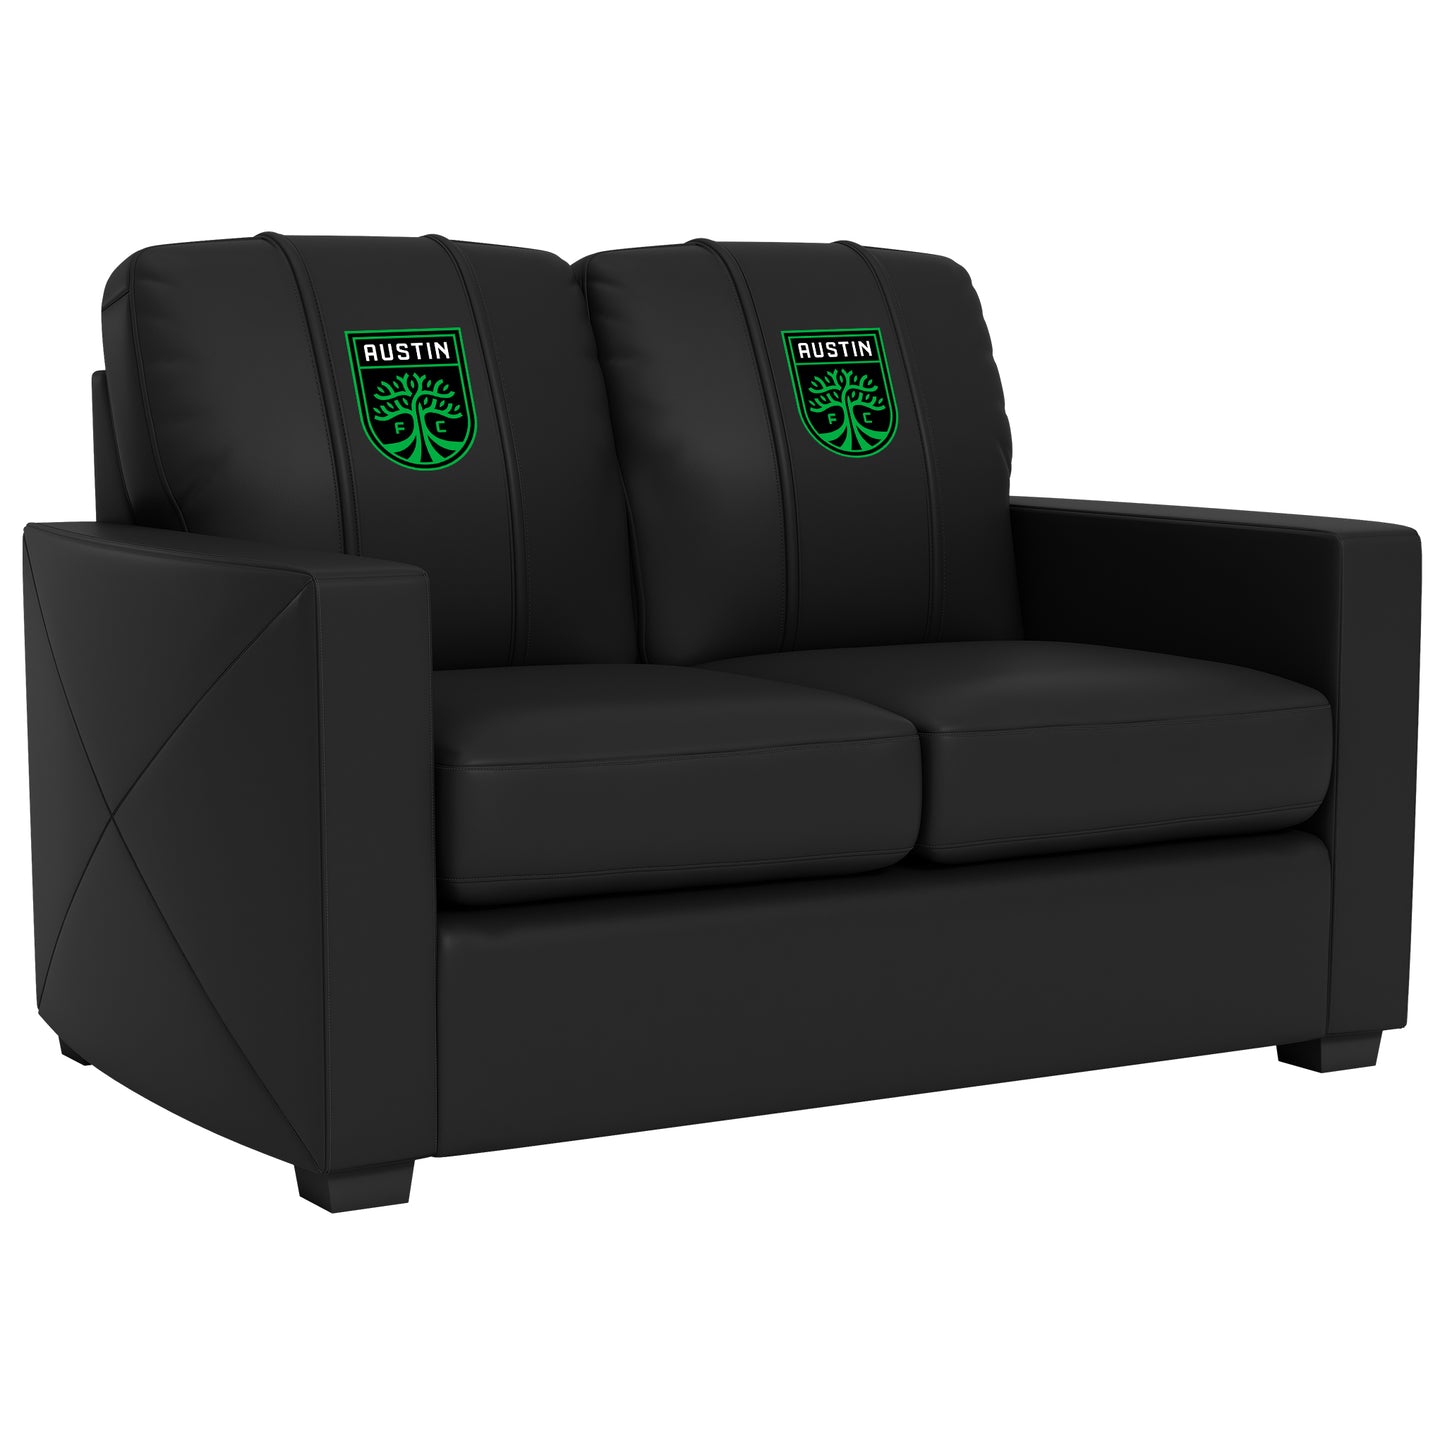 Silver Loveseat with Austin FC Logo